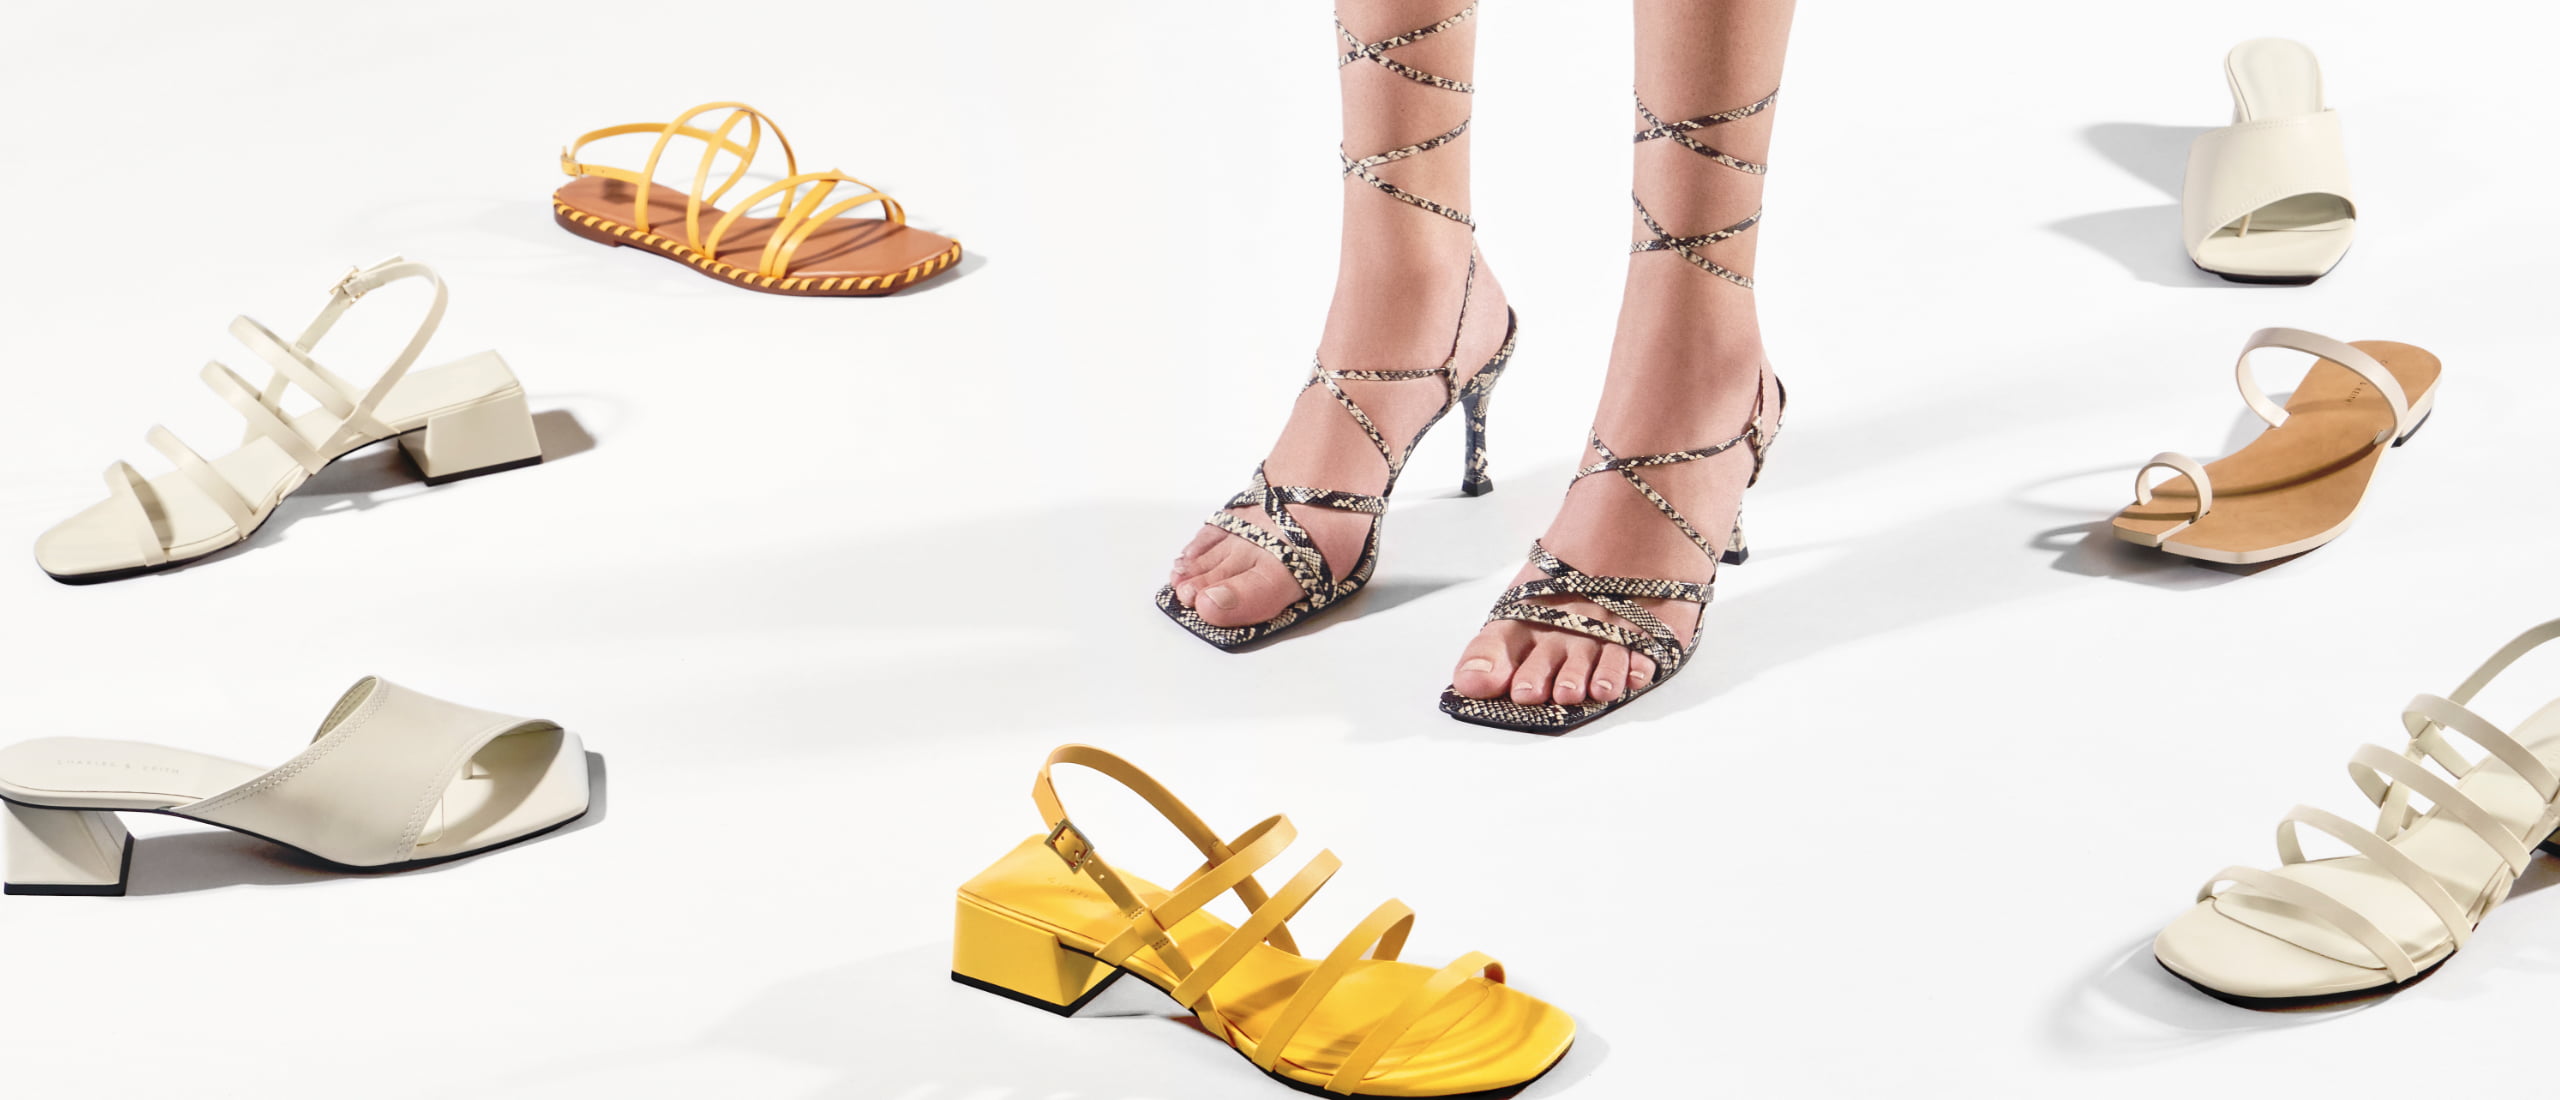 Women’s whipstitch trim strappy sandals, snake print tie-around strappy sandals, trapeze heel asymmetric heels, strappy geometric slingback sandals and toe ring flat sandals - CHARLES & KEITH